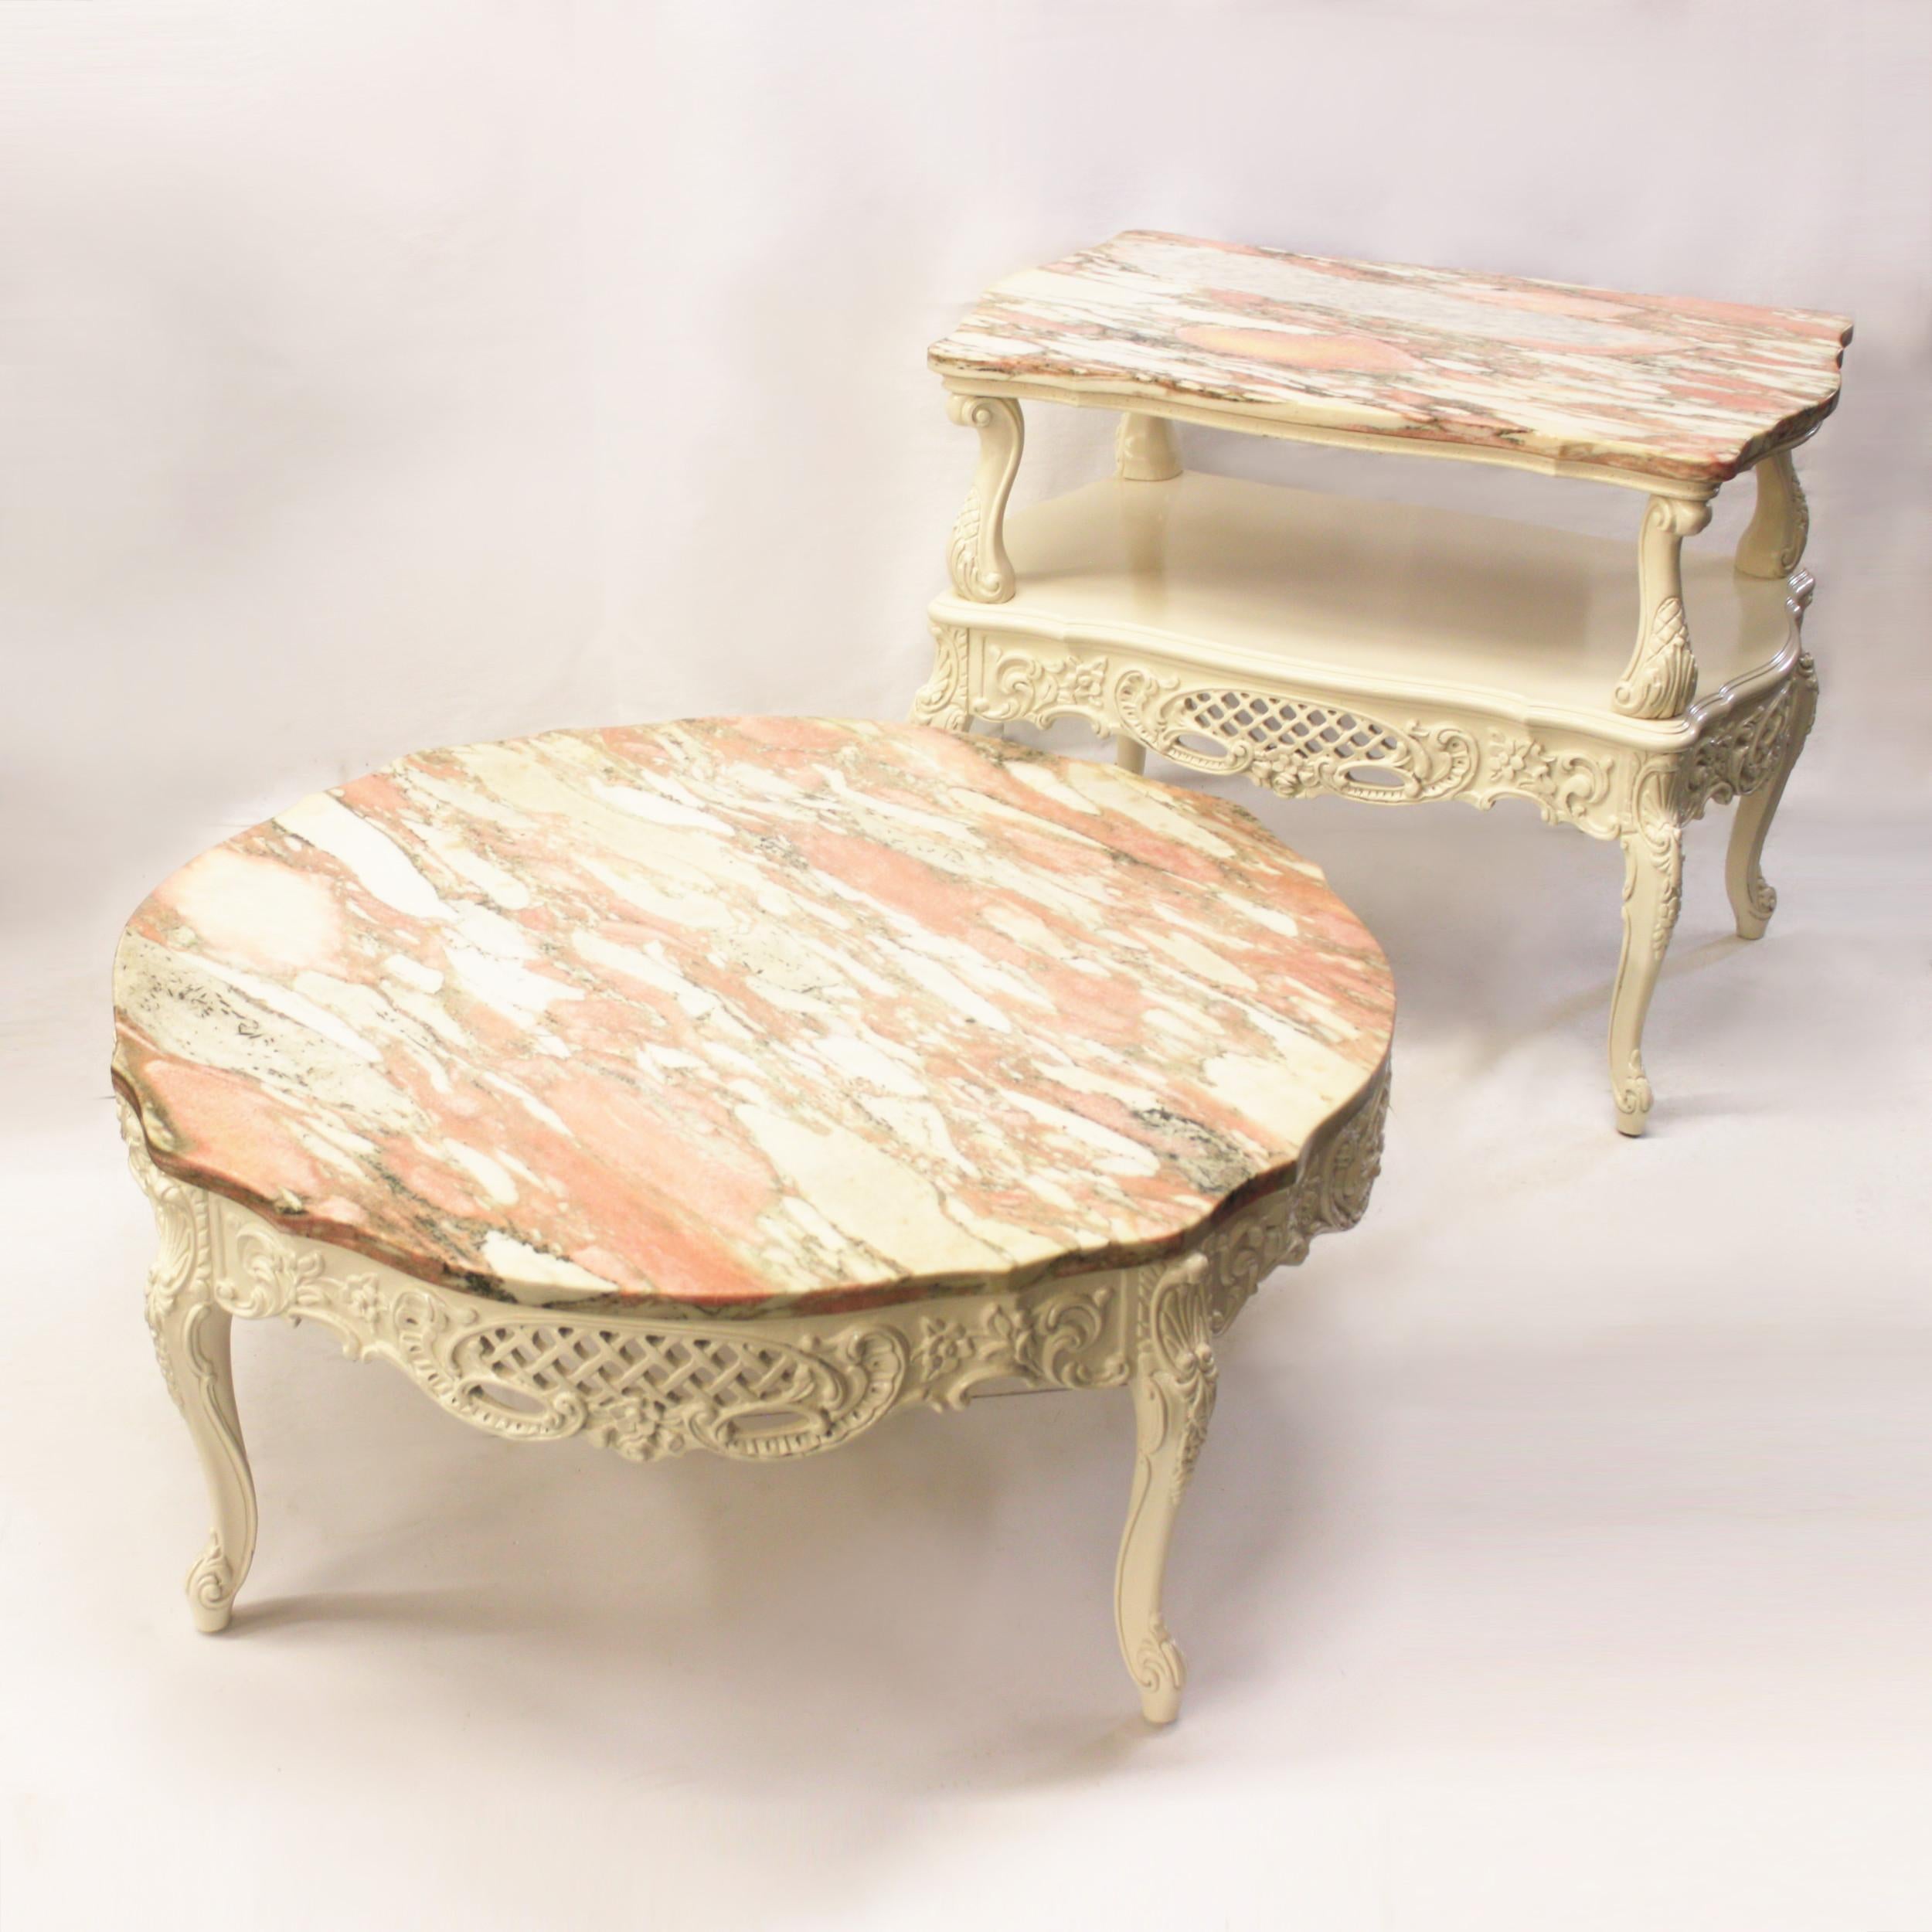 Wonderful pair of vintage 1950s French Provincial style tables. Tables feature intricately carved, solid wood bases with a fresh coat of off-white enamel paint. Marble tops are in excellent condition and are cut to perfectly mimic the shape of the